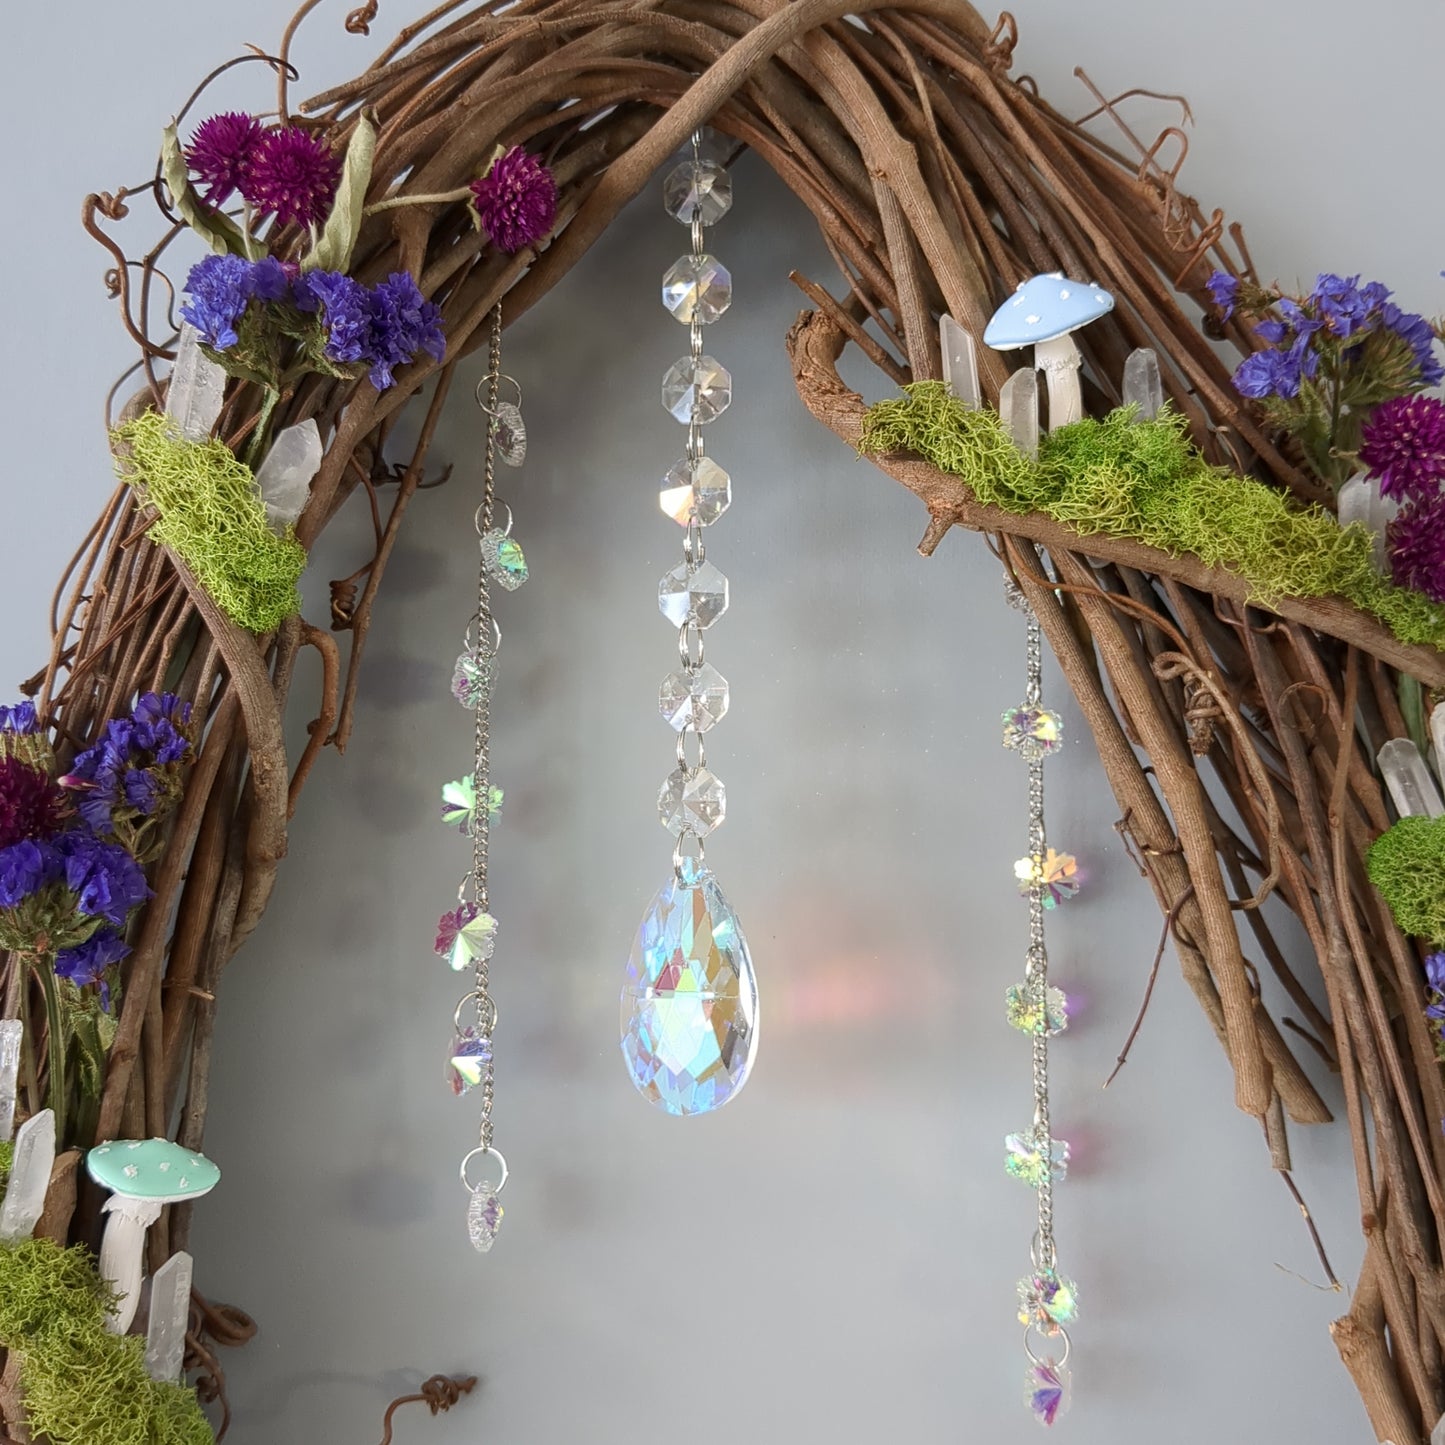 Fairy Wreath with green and blue mushrooma